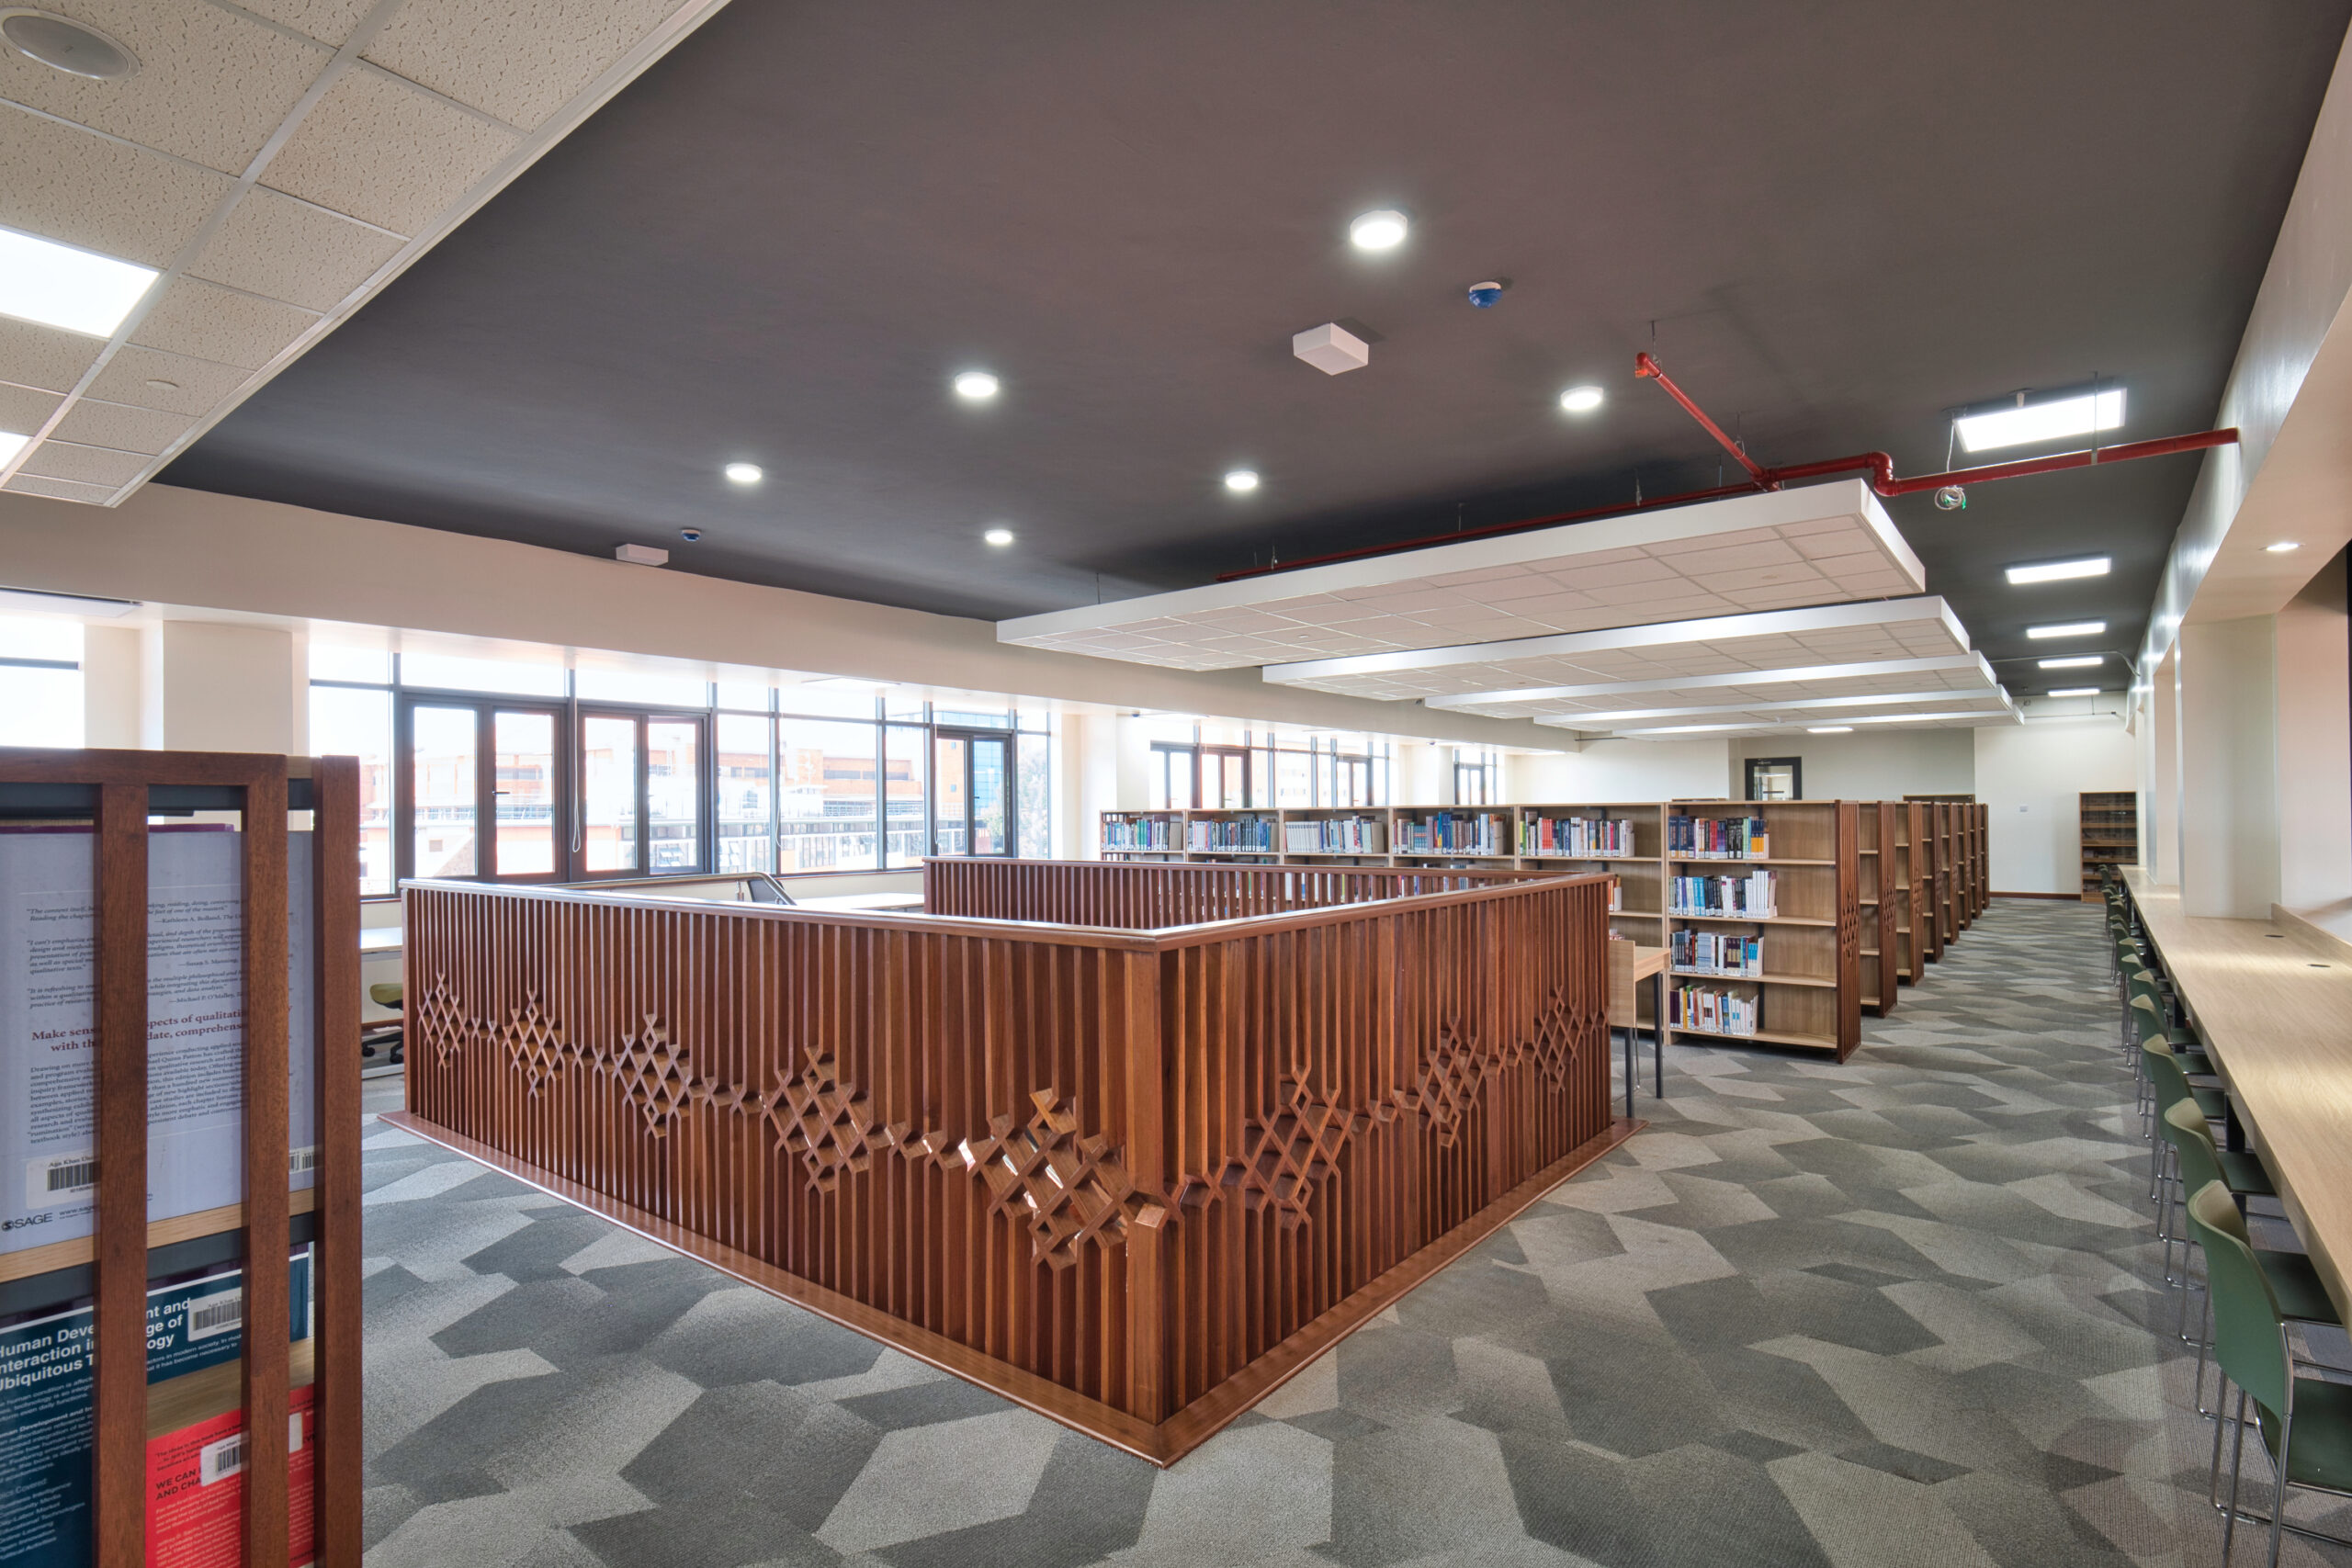 Interior view of upper level of library